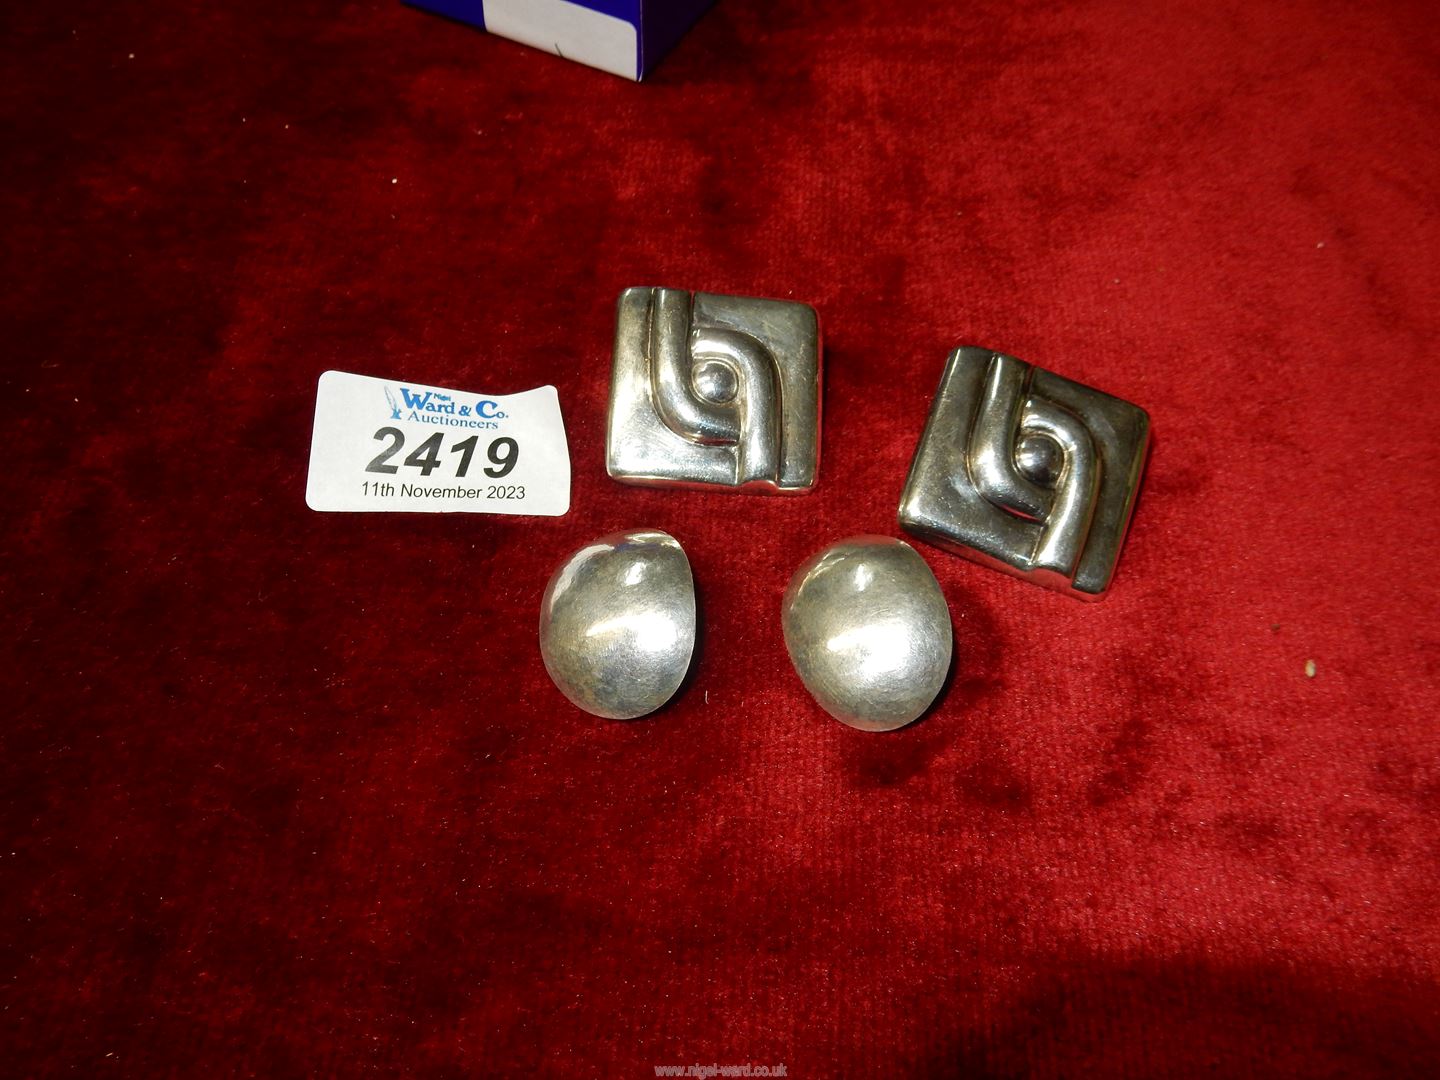 A pair of Italian silver 1960's stud Earrings and a pair of silver oblong stud Earrings.